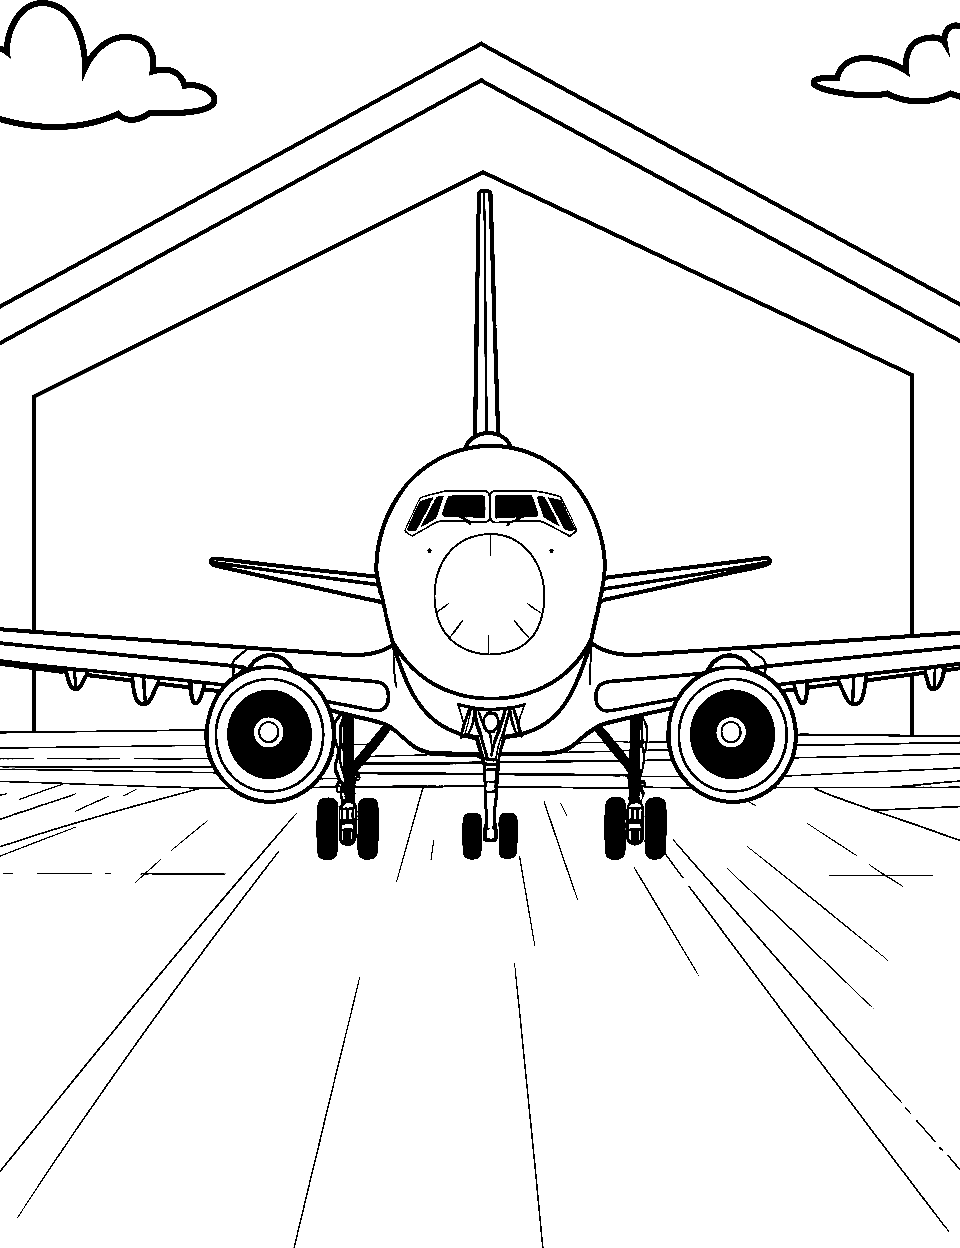 Airplane Hangar Coloring Page - A plane parked in front of an open hangar.